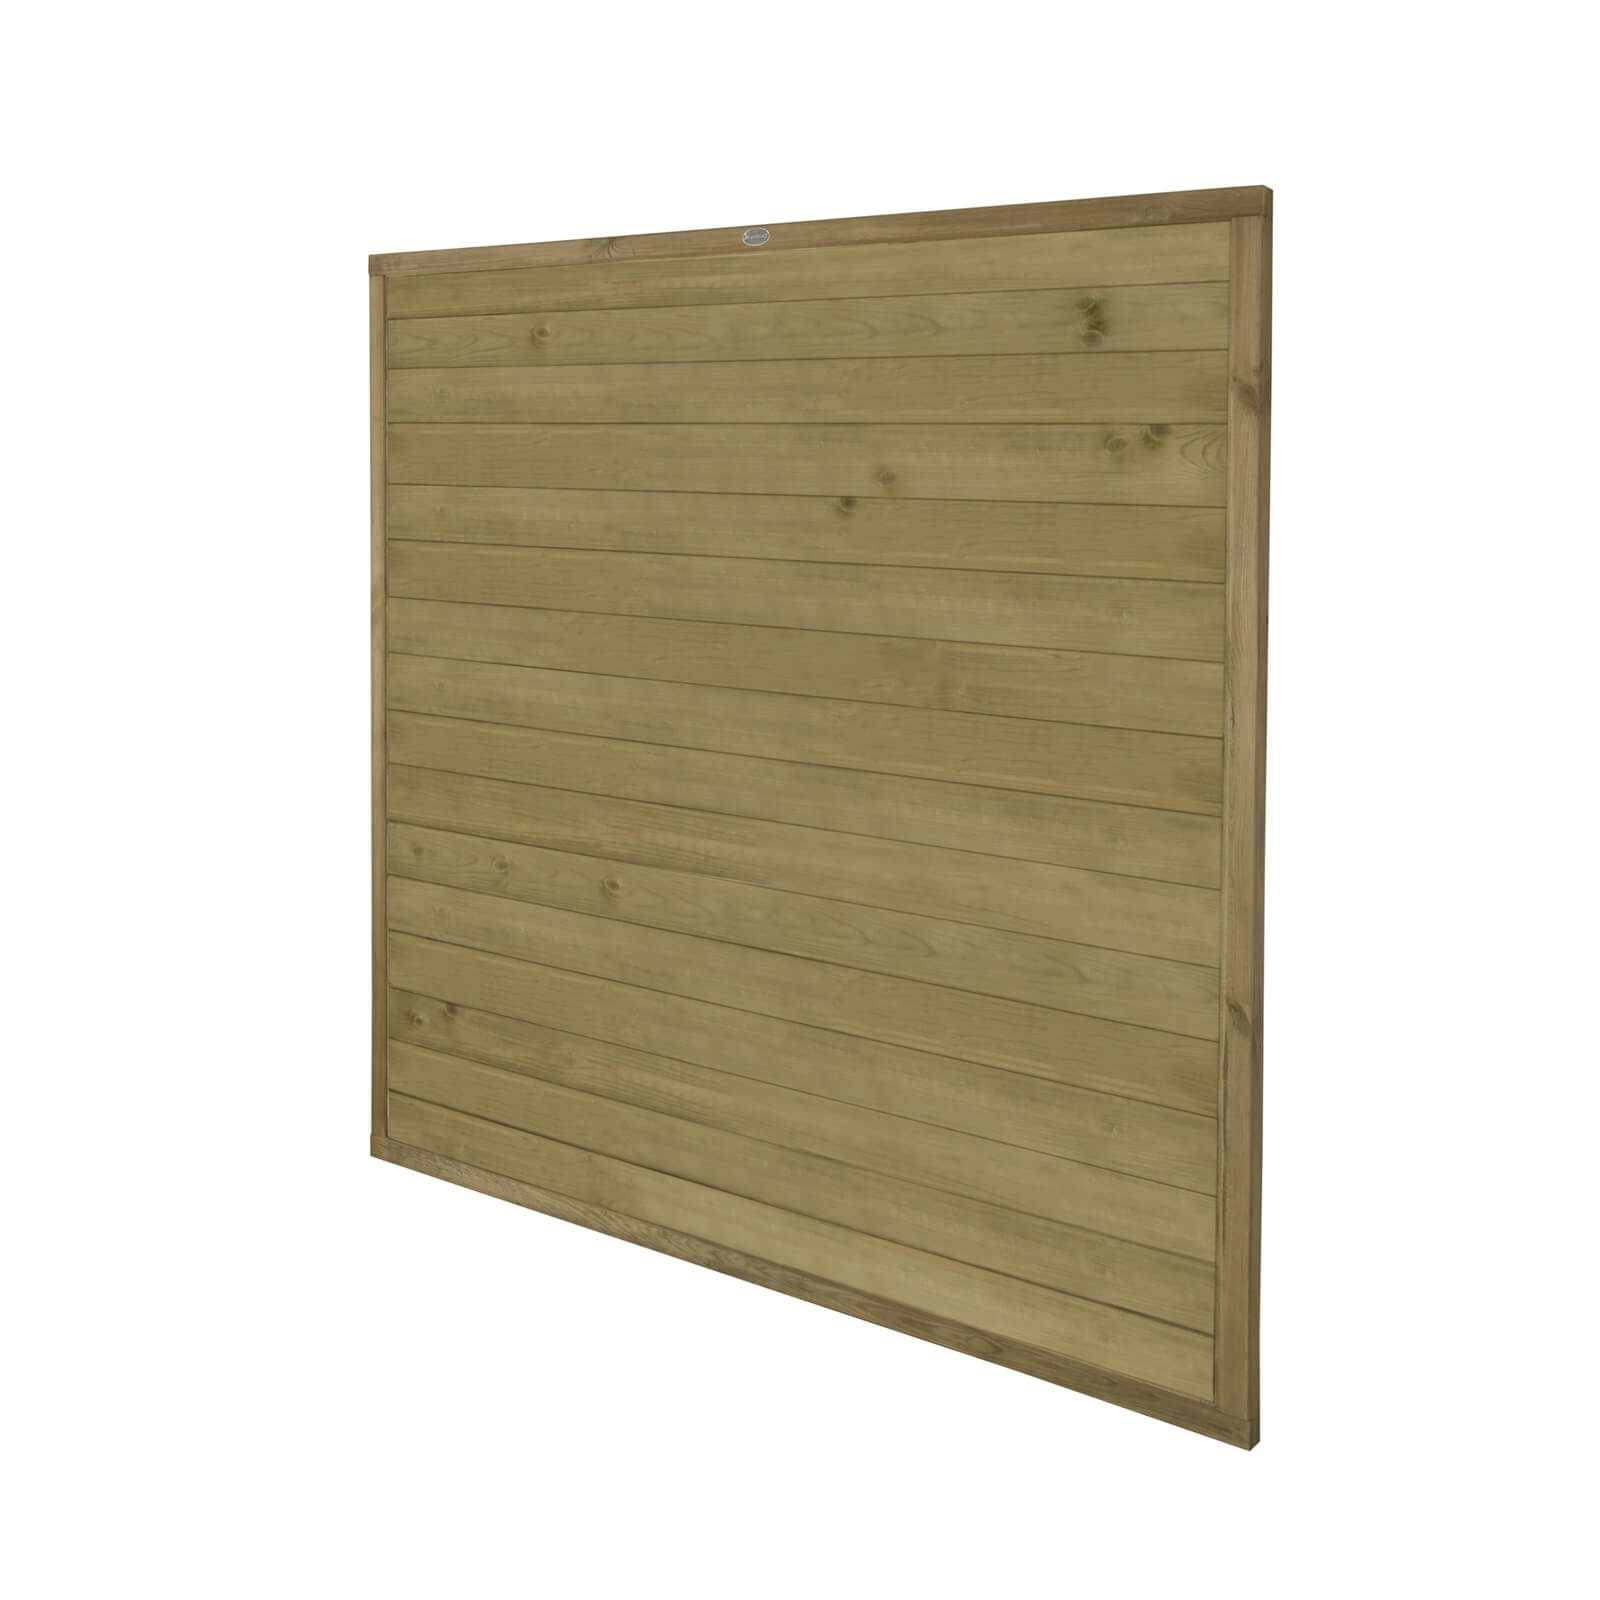 Horizontal Tongue & Groove Fence Panel - 6ft - Pack of 5